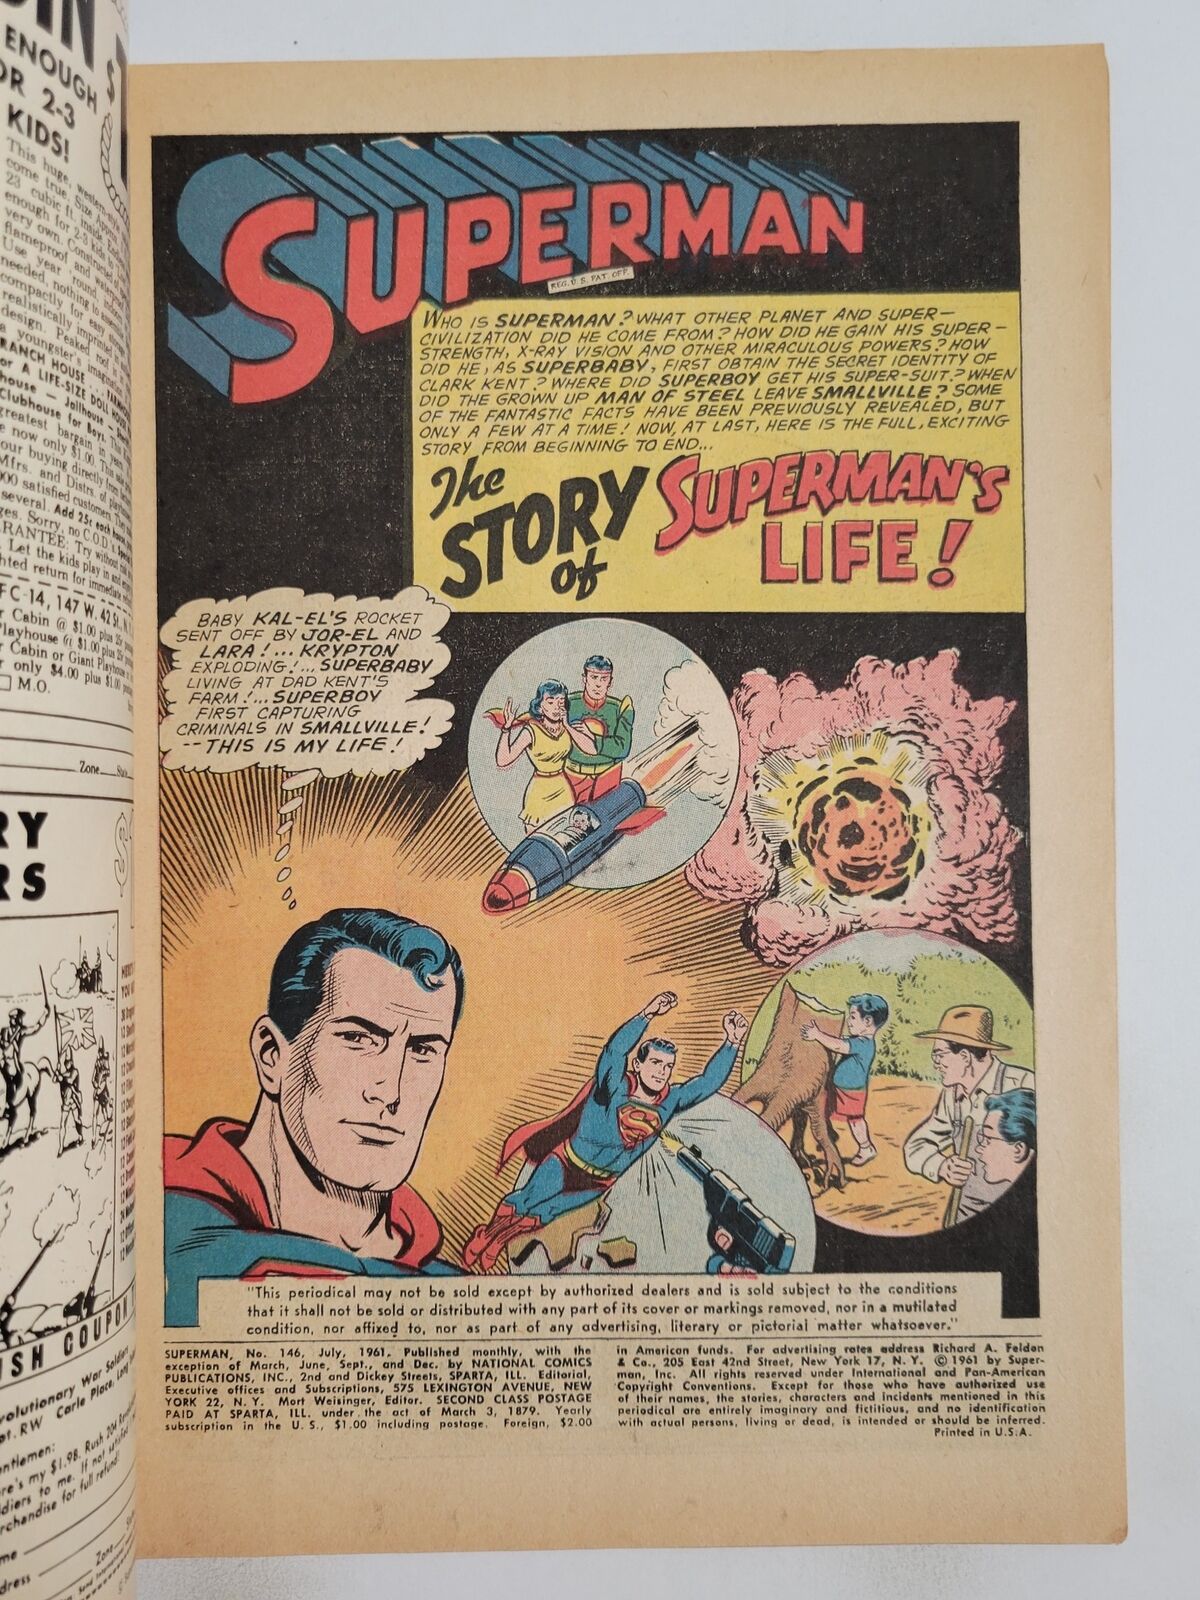 SUPERMAN #146 (G/VG) 1961 "THE STORY of SUPERMAN'S LIFE!" SILVER AGE DC COMICS